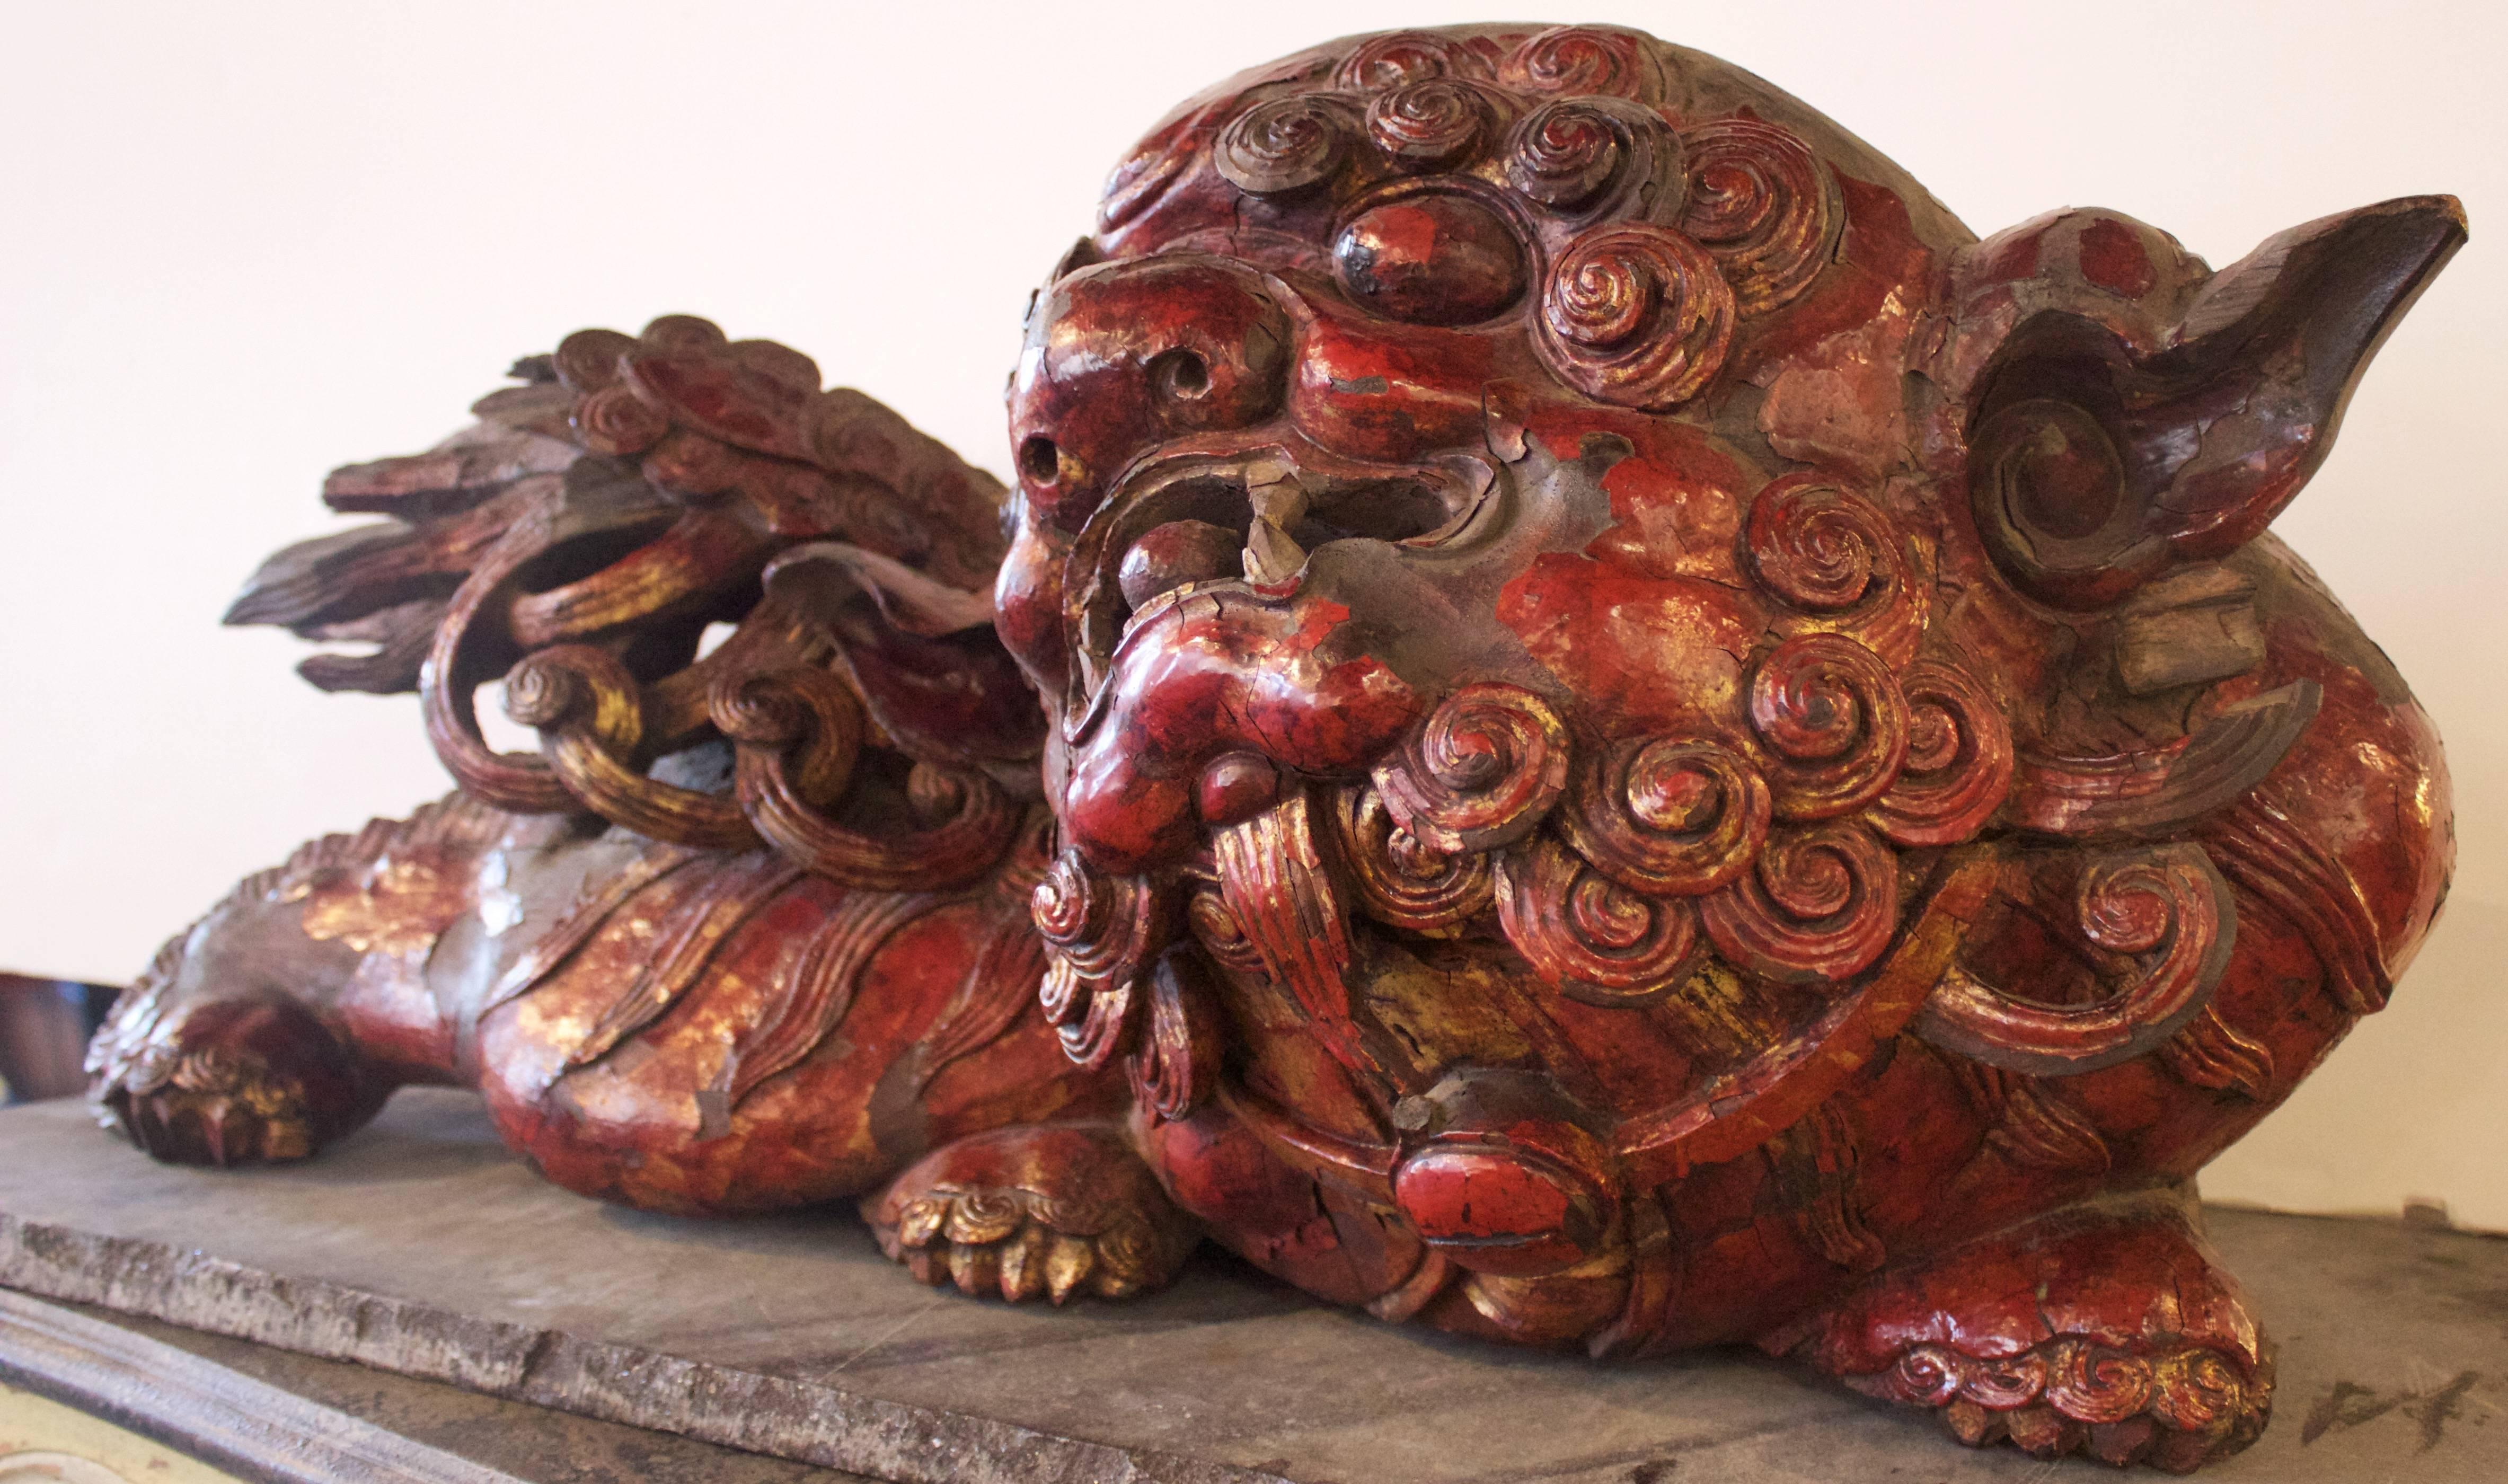 Made of lacquered hand-carved wood. This temple guardian posed as if reacting to and enemy.